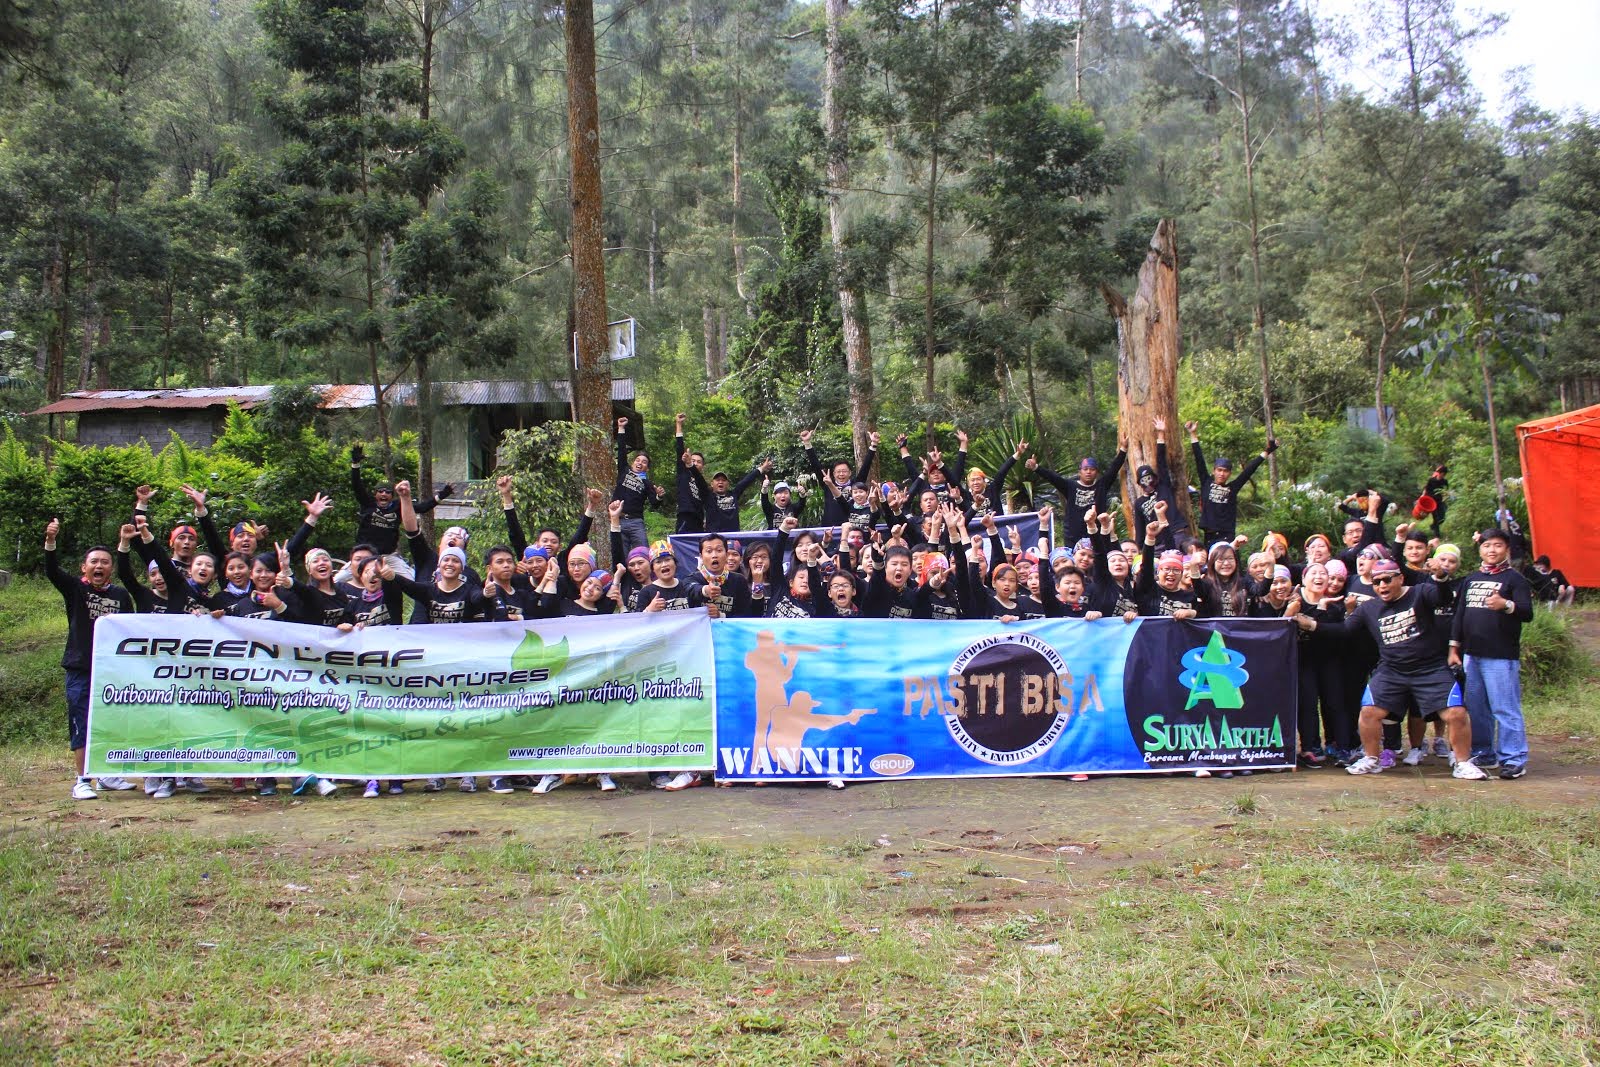 Wannie Group Outbound & Paintball